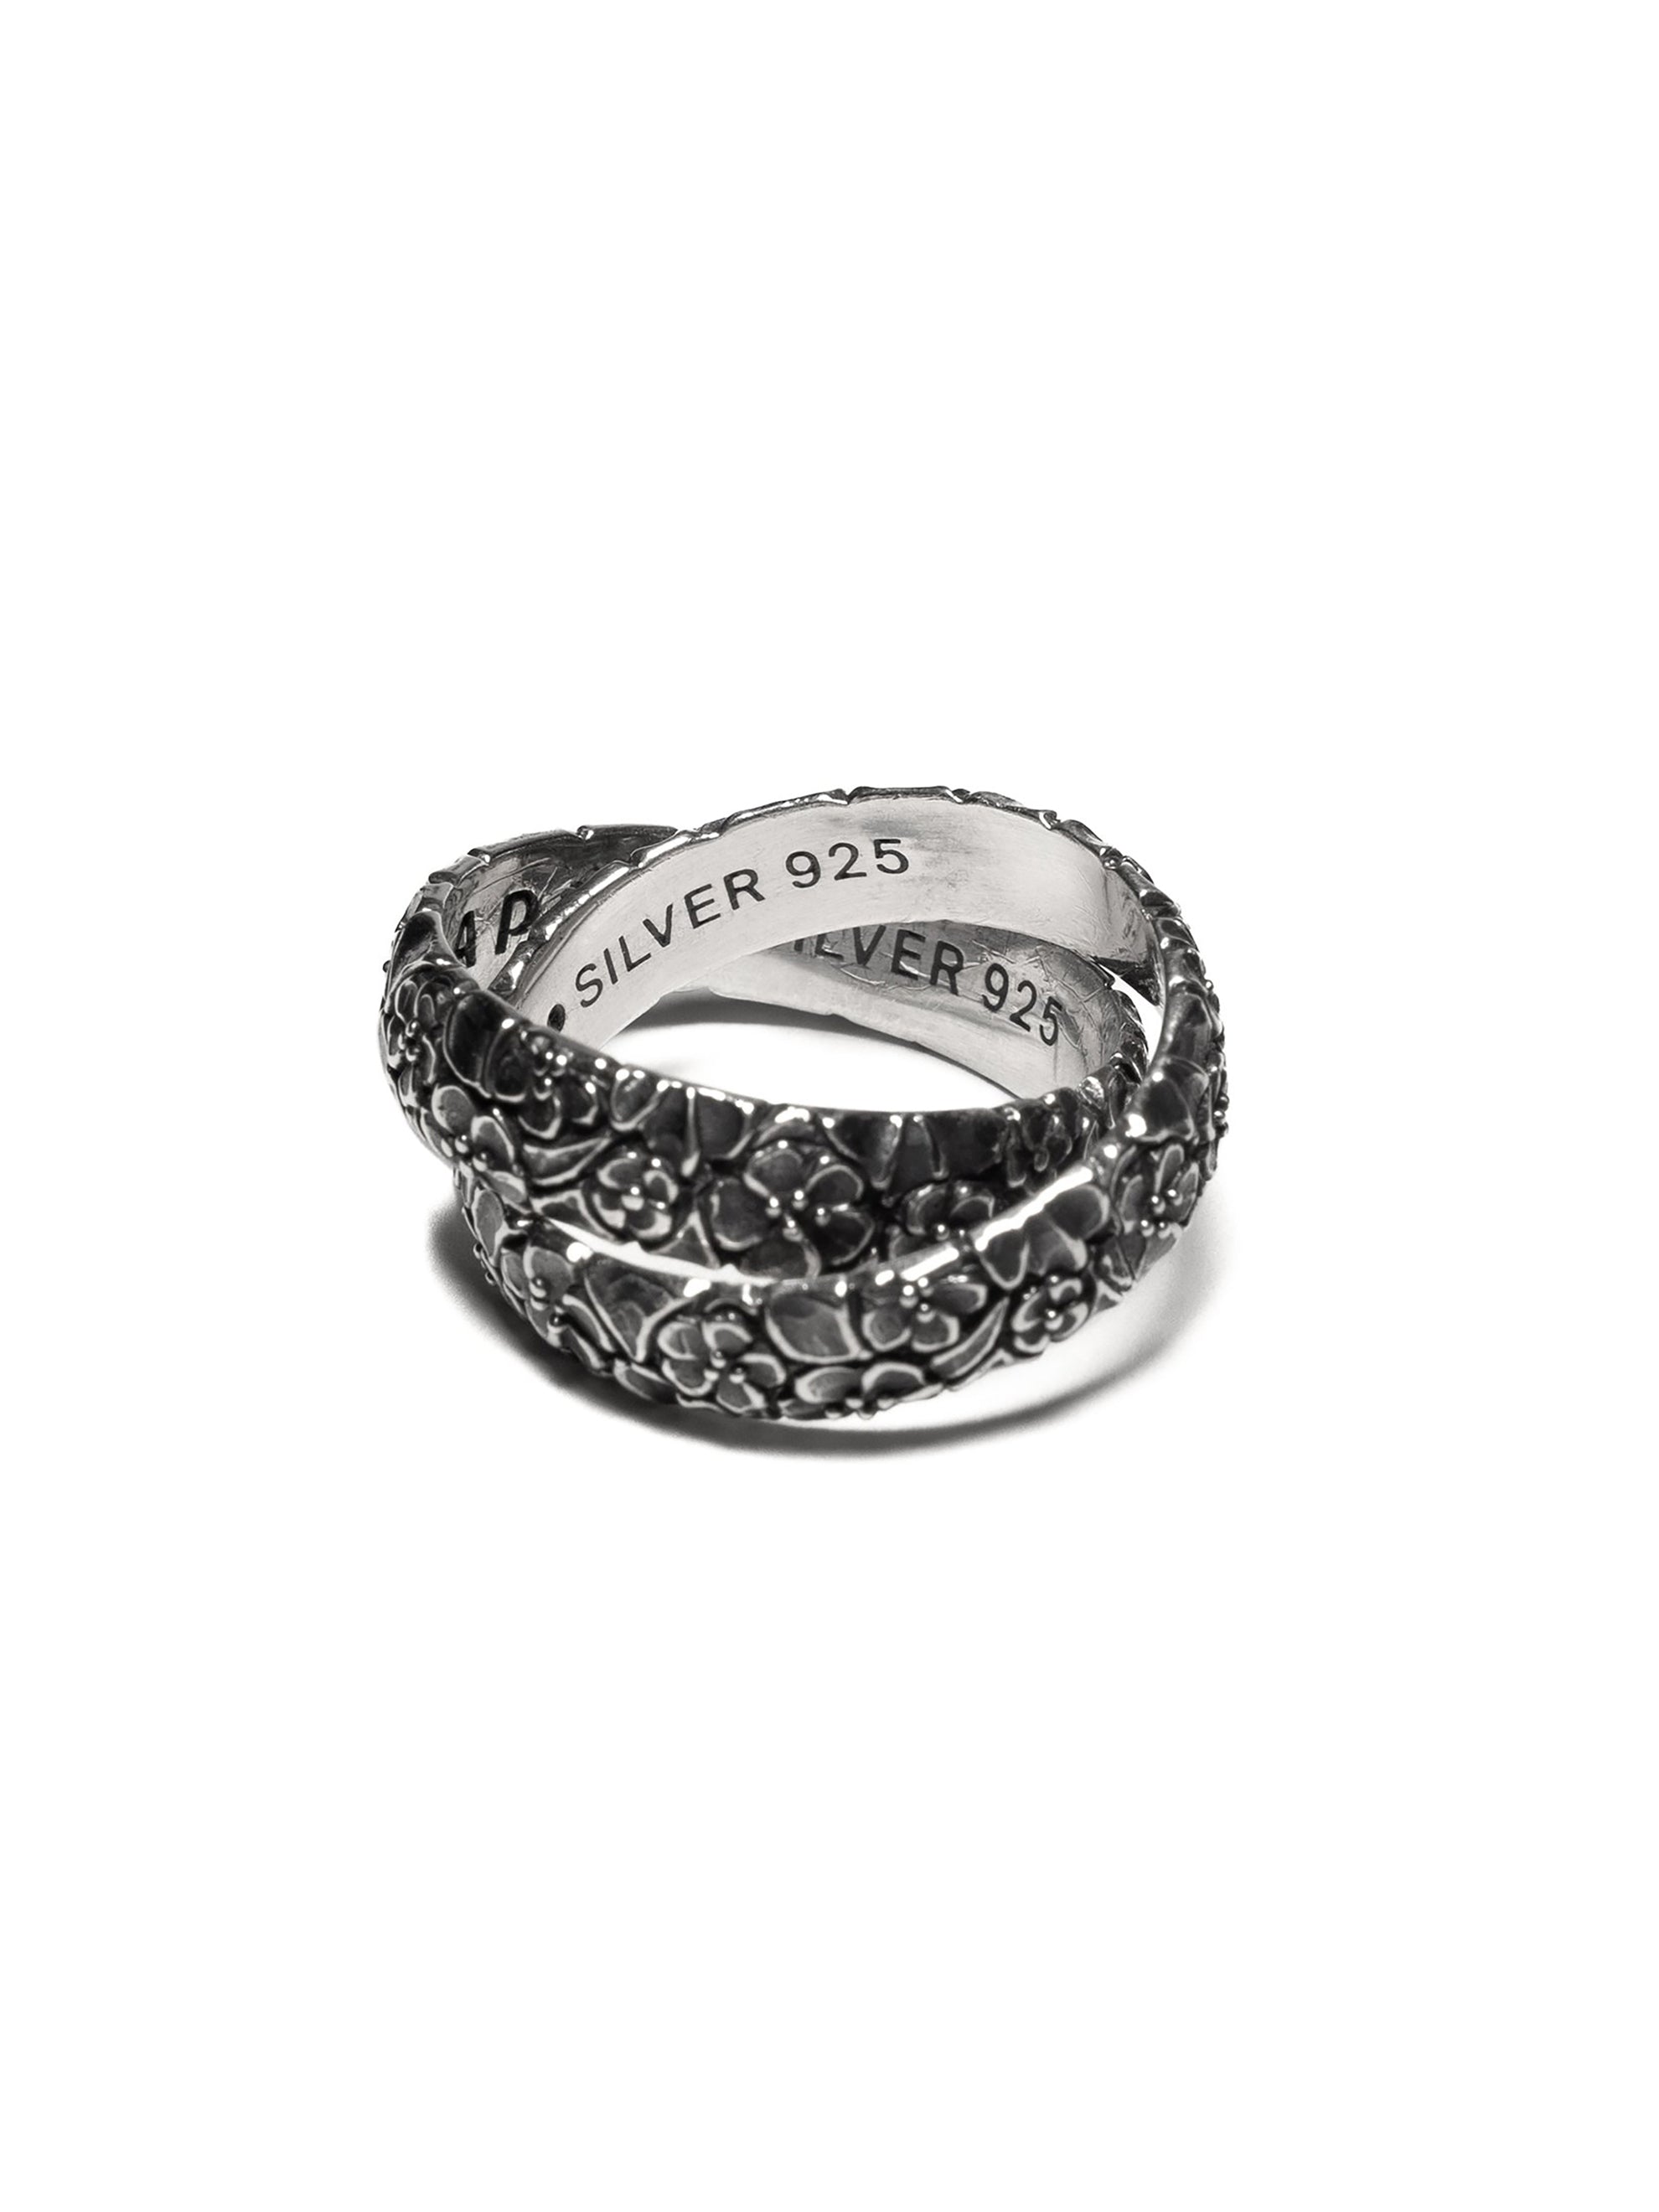 FLORAL LINKED RING (Silver 925)